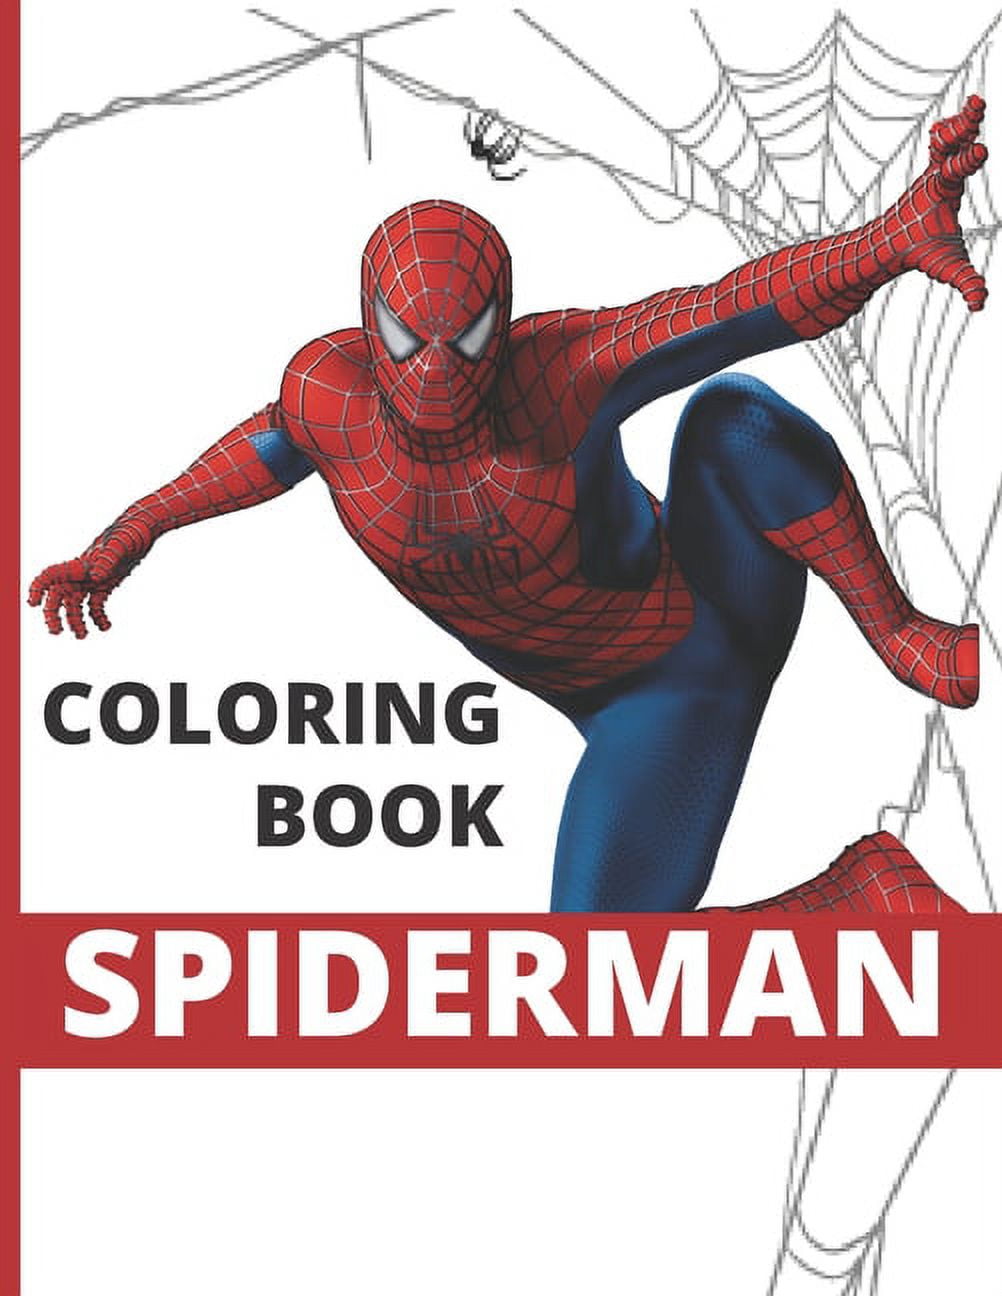 Spiderman coloring book great coloring book for kids boys girls ages